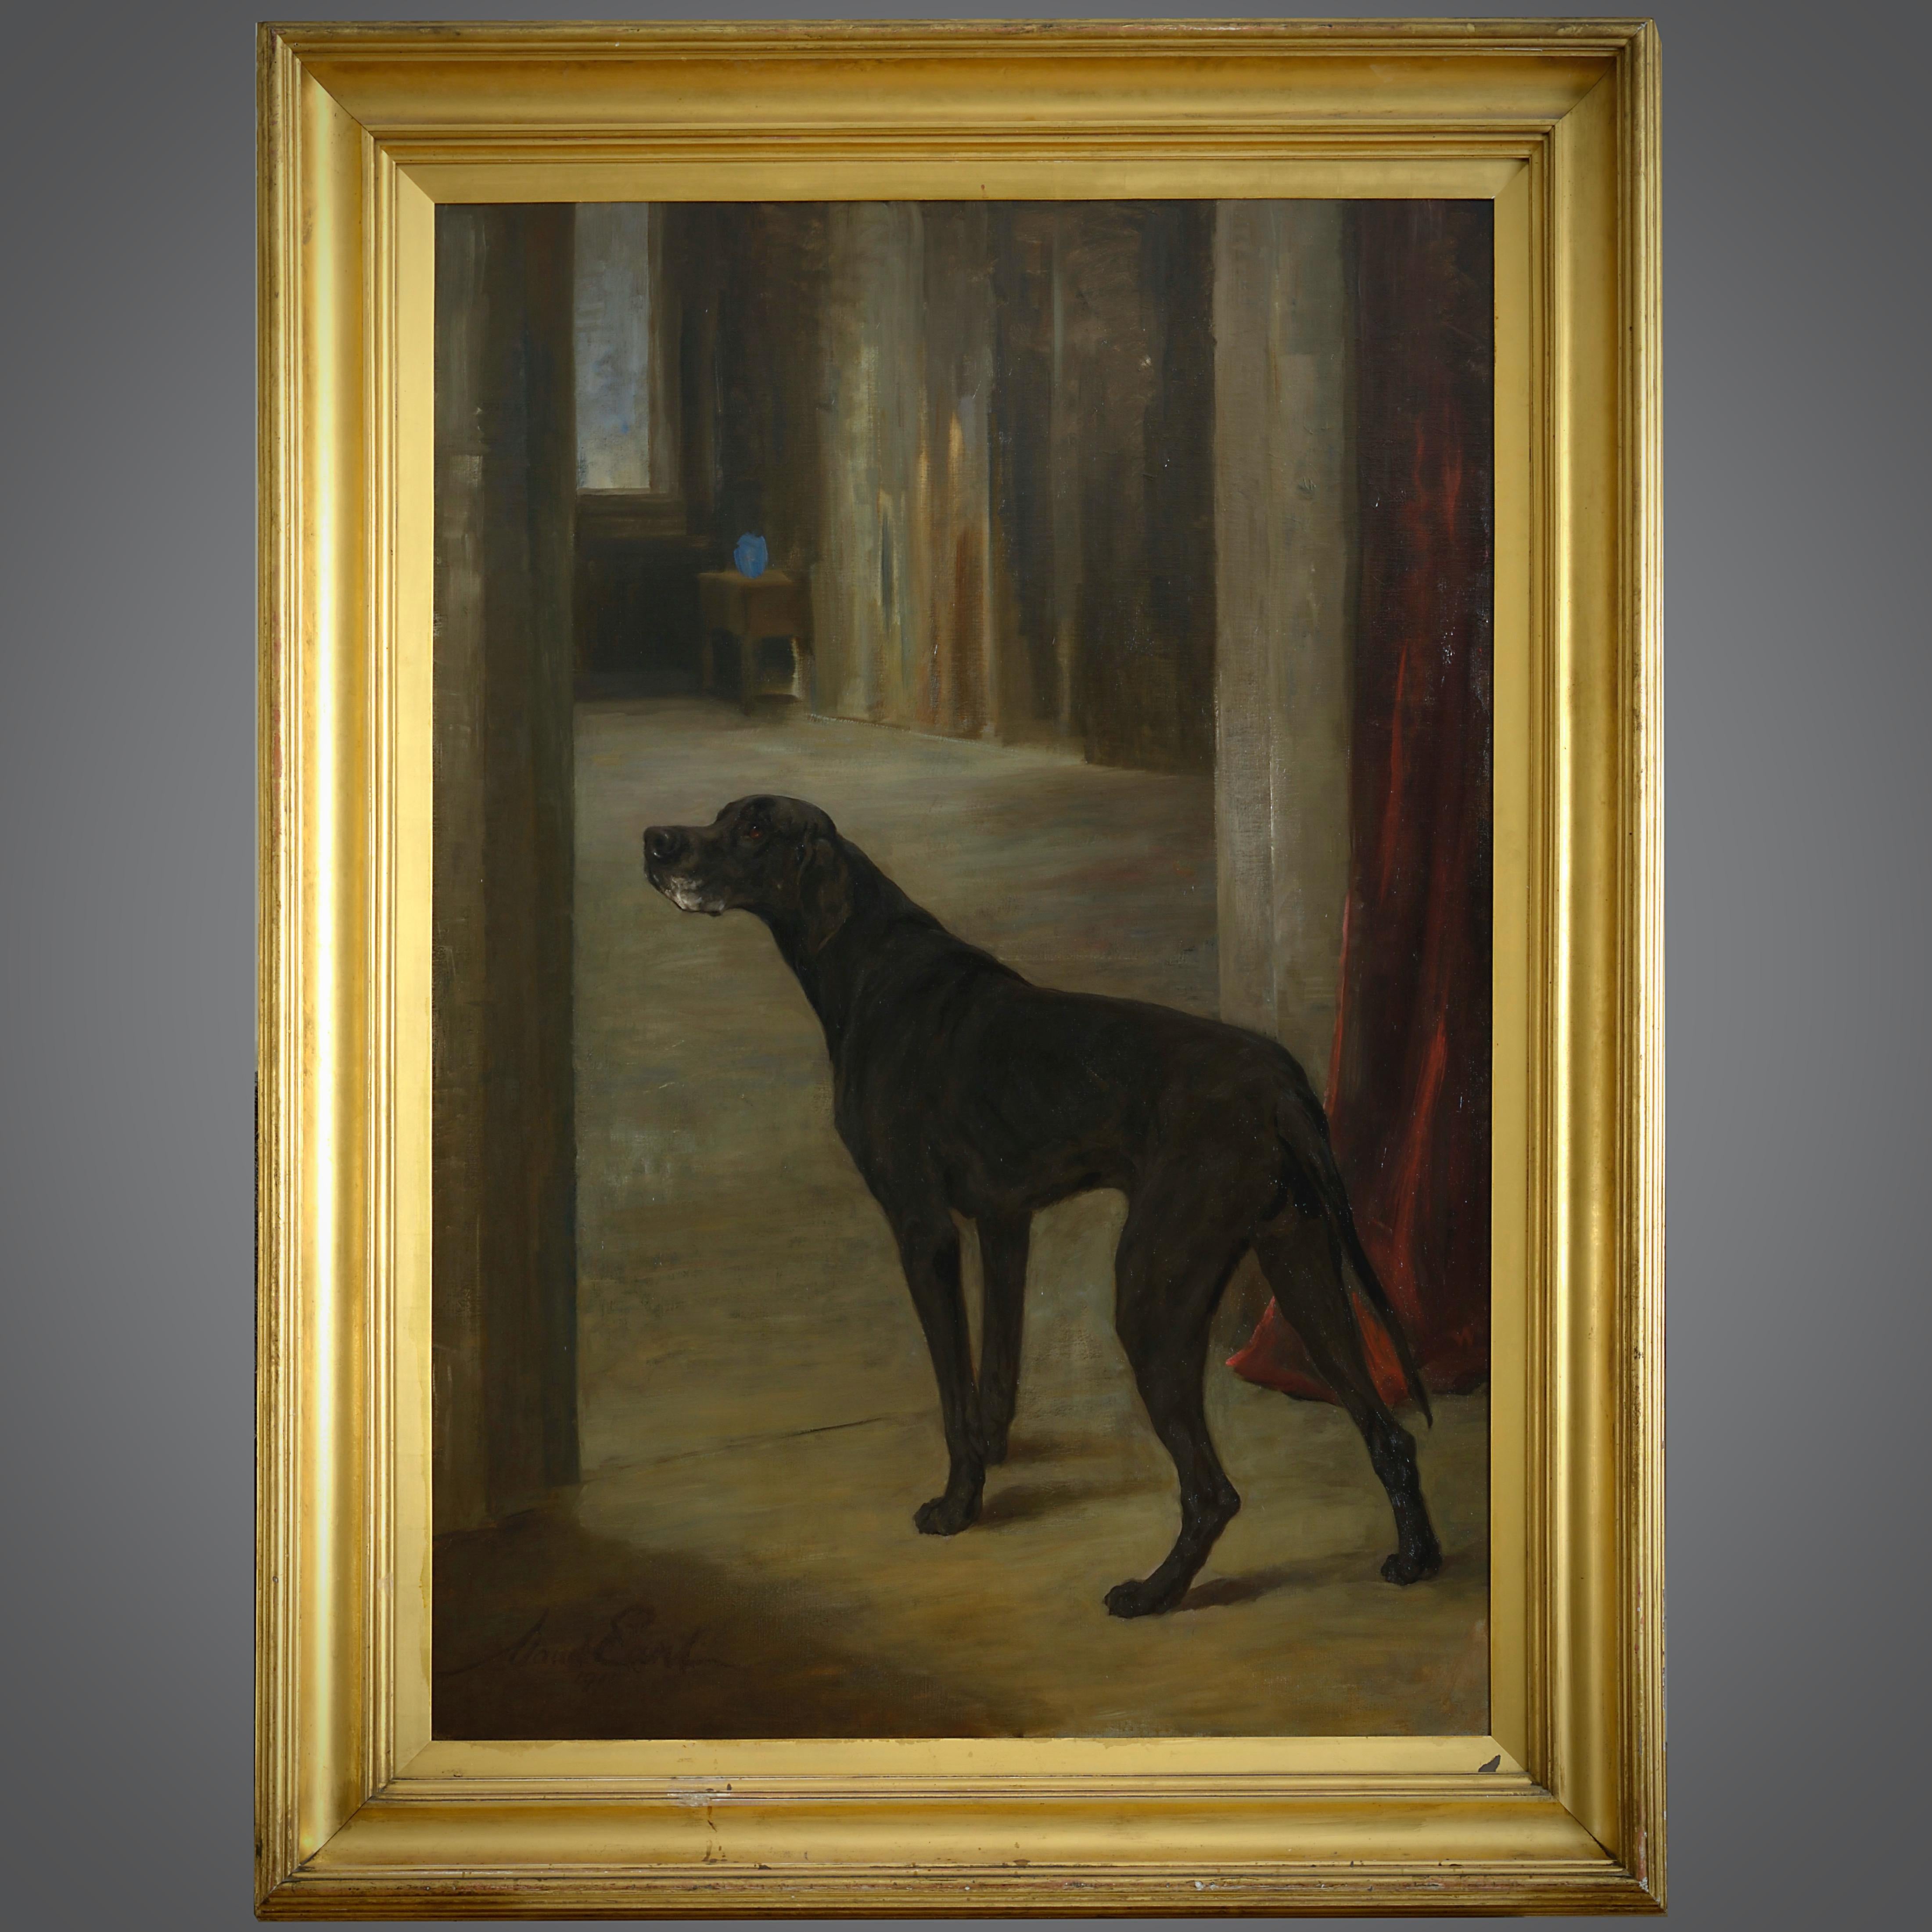 Maud Earl (1863-1943)

‘LARGO’, A POINTER IN A HALLWAY.

Signed and dated Maud Earl 1910.
Oil on canvas, in it’s original giltwood frame.

Provenance: painted for William Arkwright, Sutton Hall, Sutton Scarsdale, Derbyshire, thence by descent